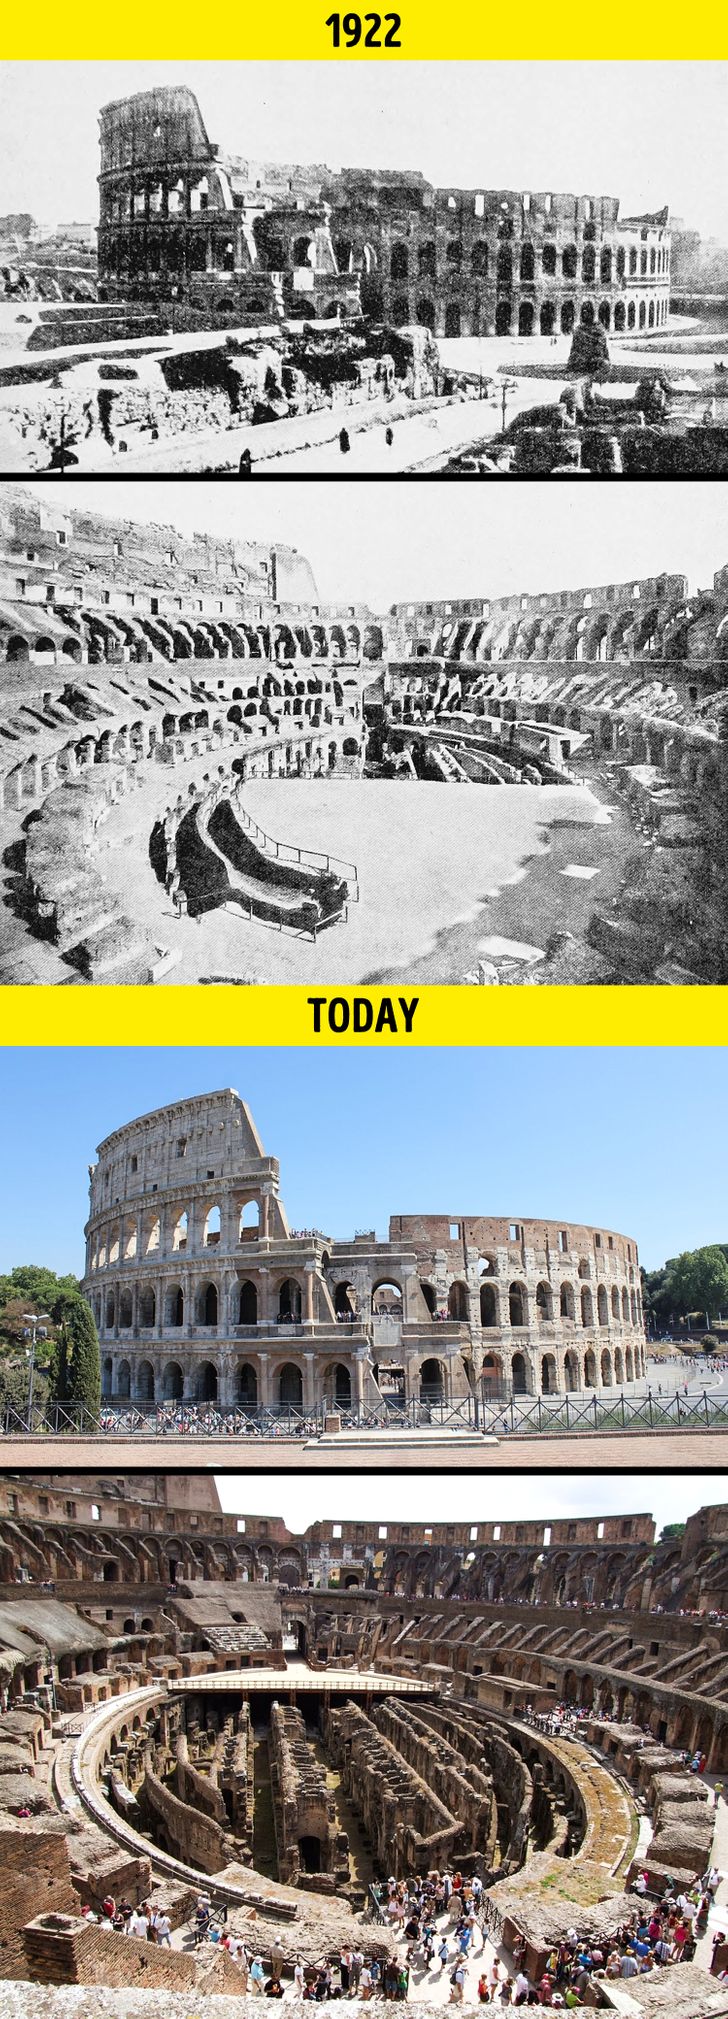 20 Pictures Showing How Much the World Has Changed in the Last 100 Years